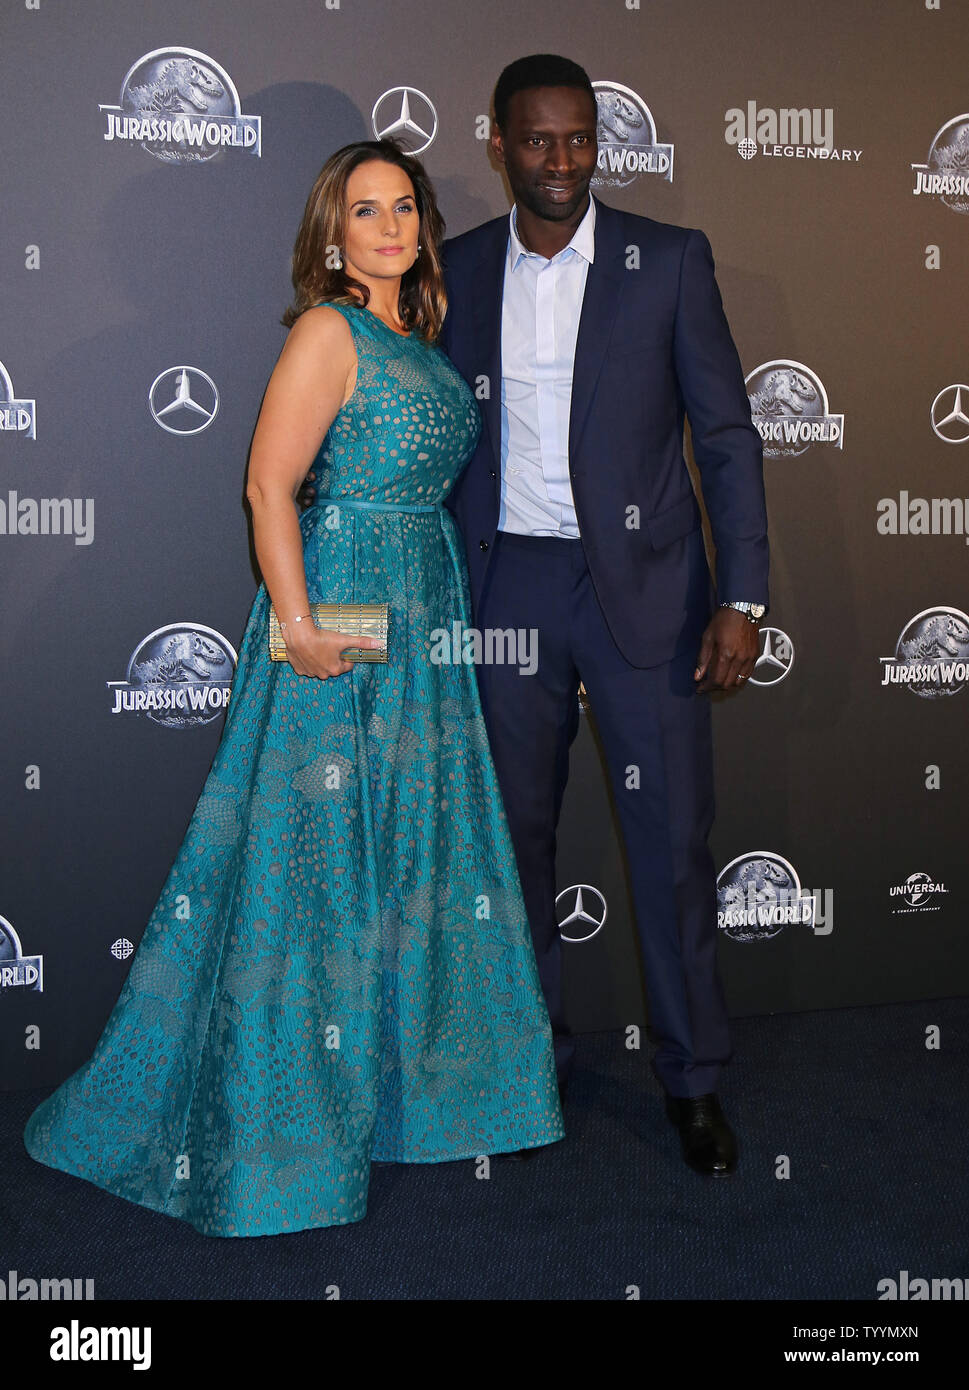 Helene Sy and Omar Sy arrive at the world premiere of the film 'Jurassic World' in Paris on May 29, 2014.   Photo by David Silpa/UPI. Stock Photo